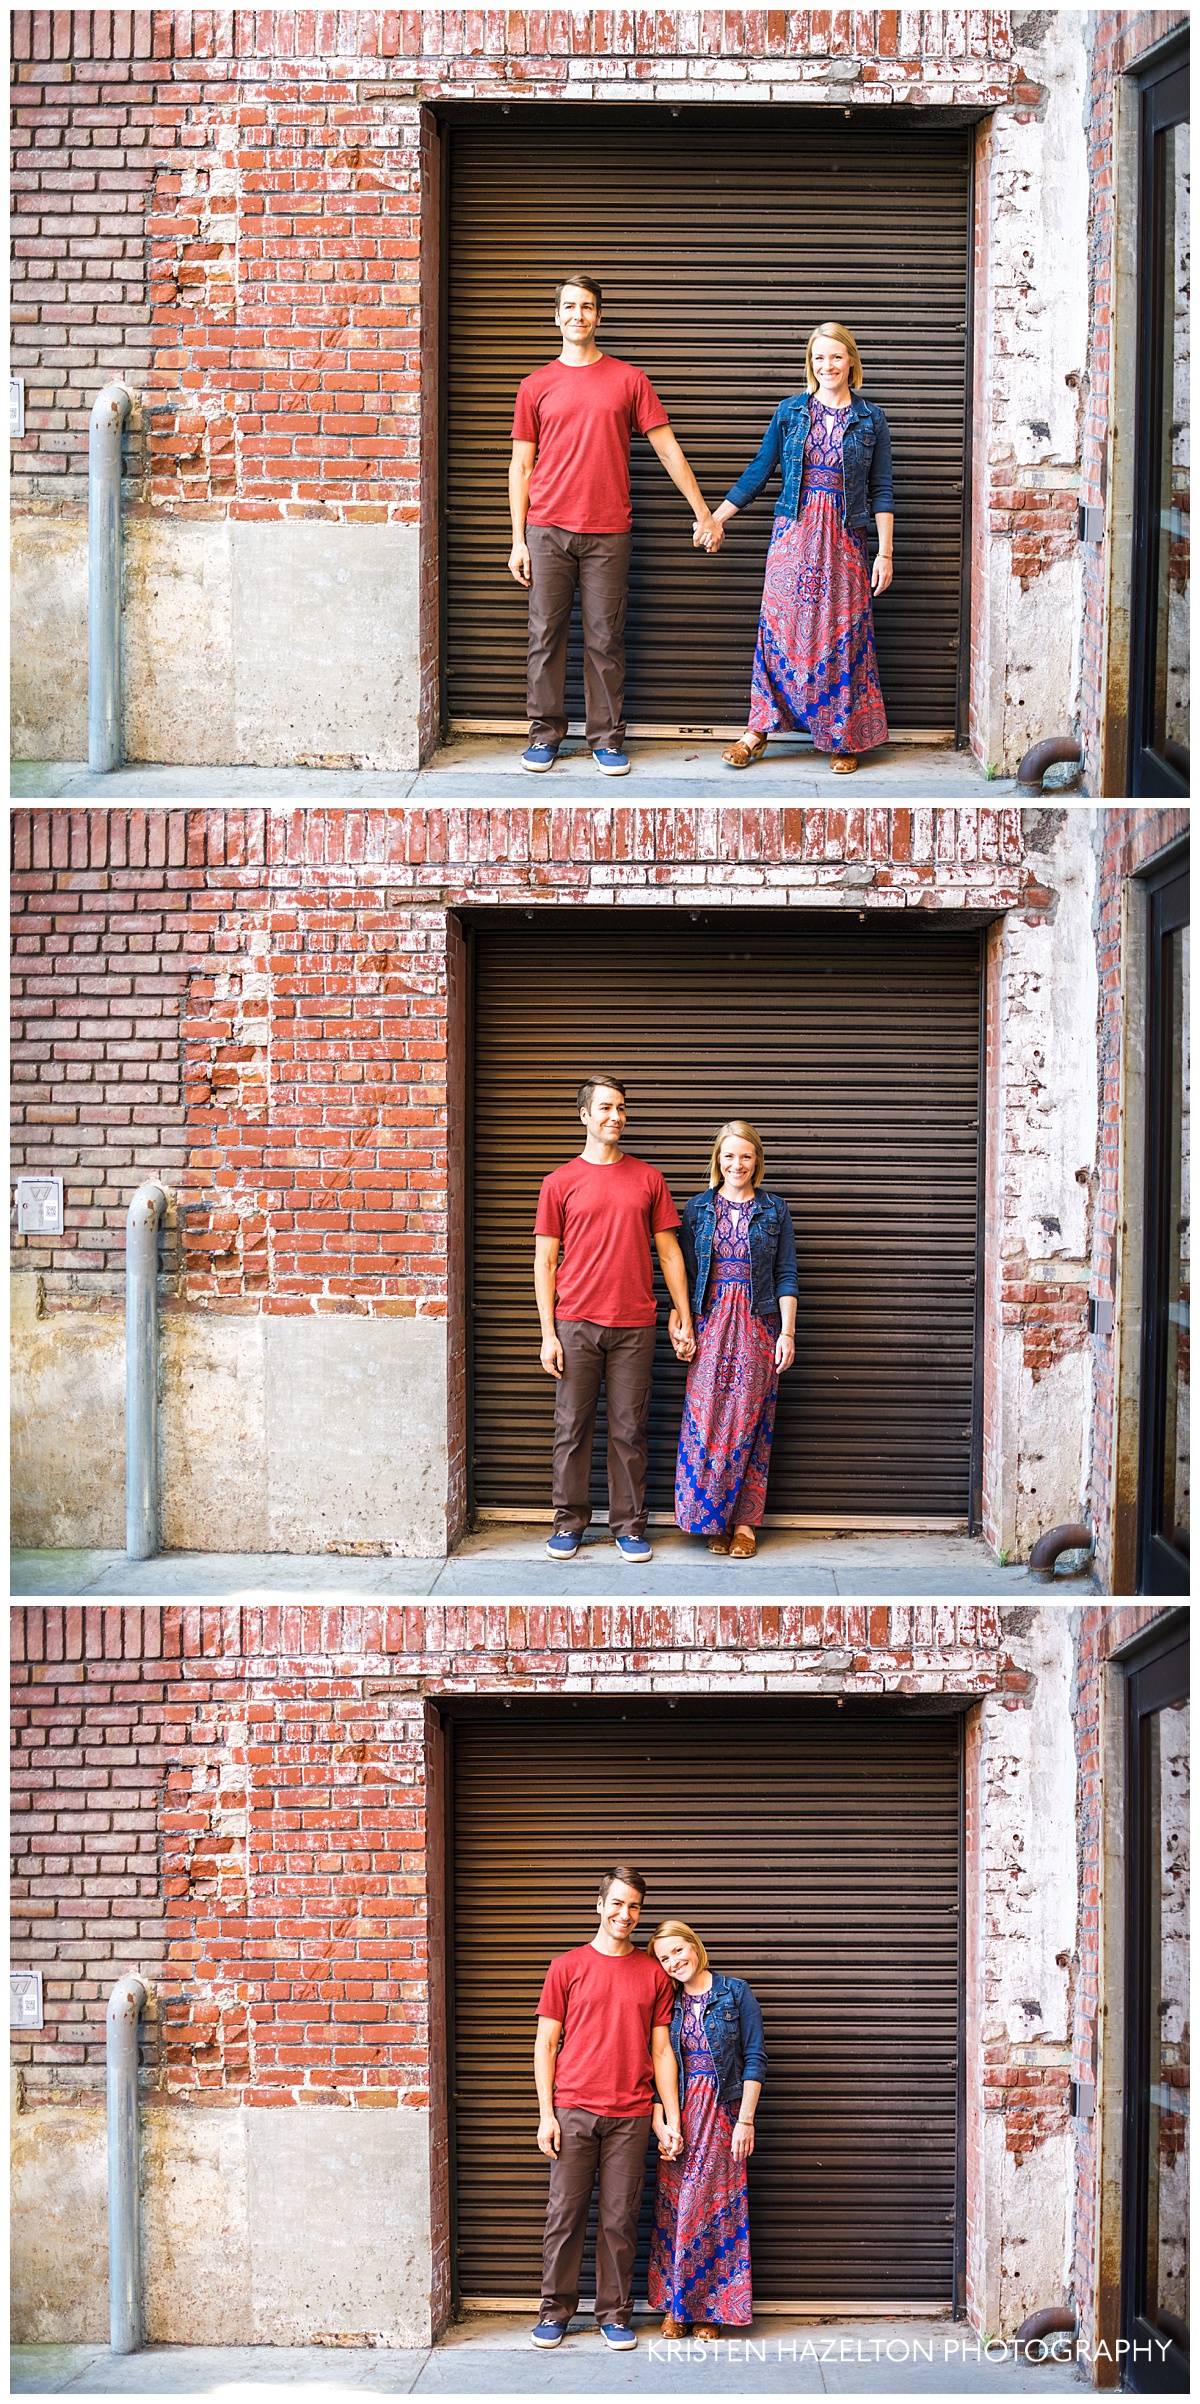 Collage of engaged couple in front of an industrial garage door. With each image the woman steps closer to the man